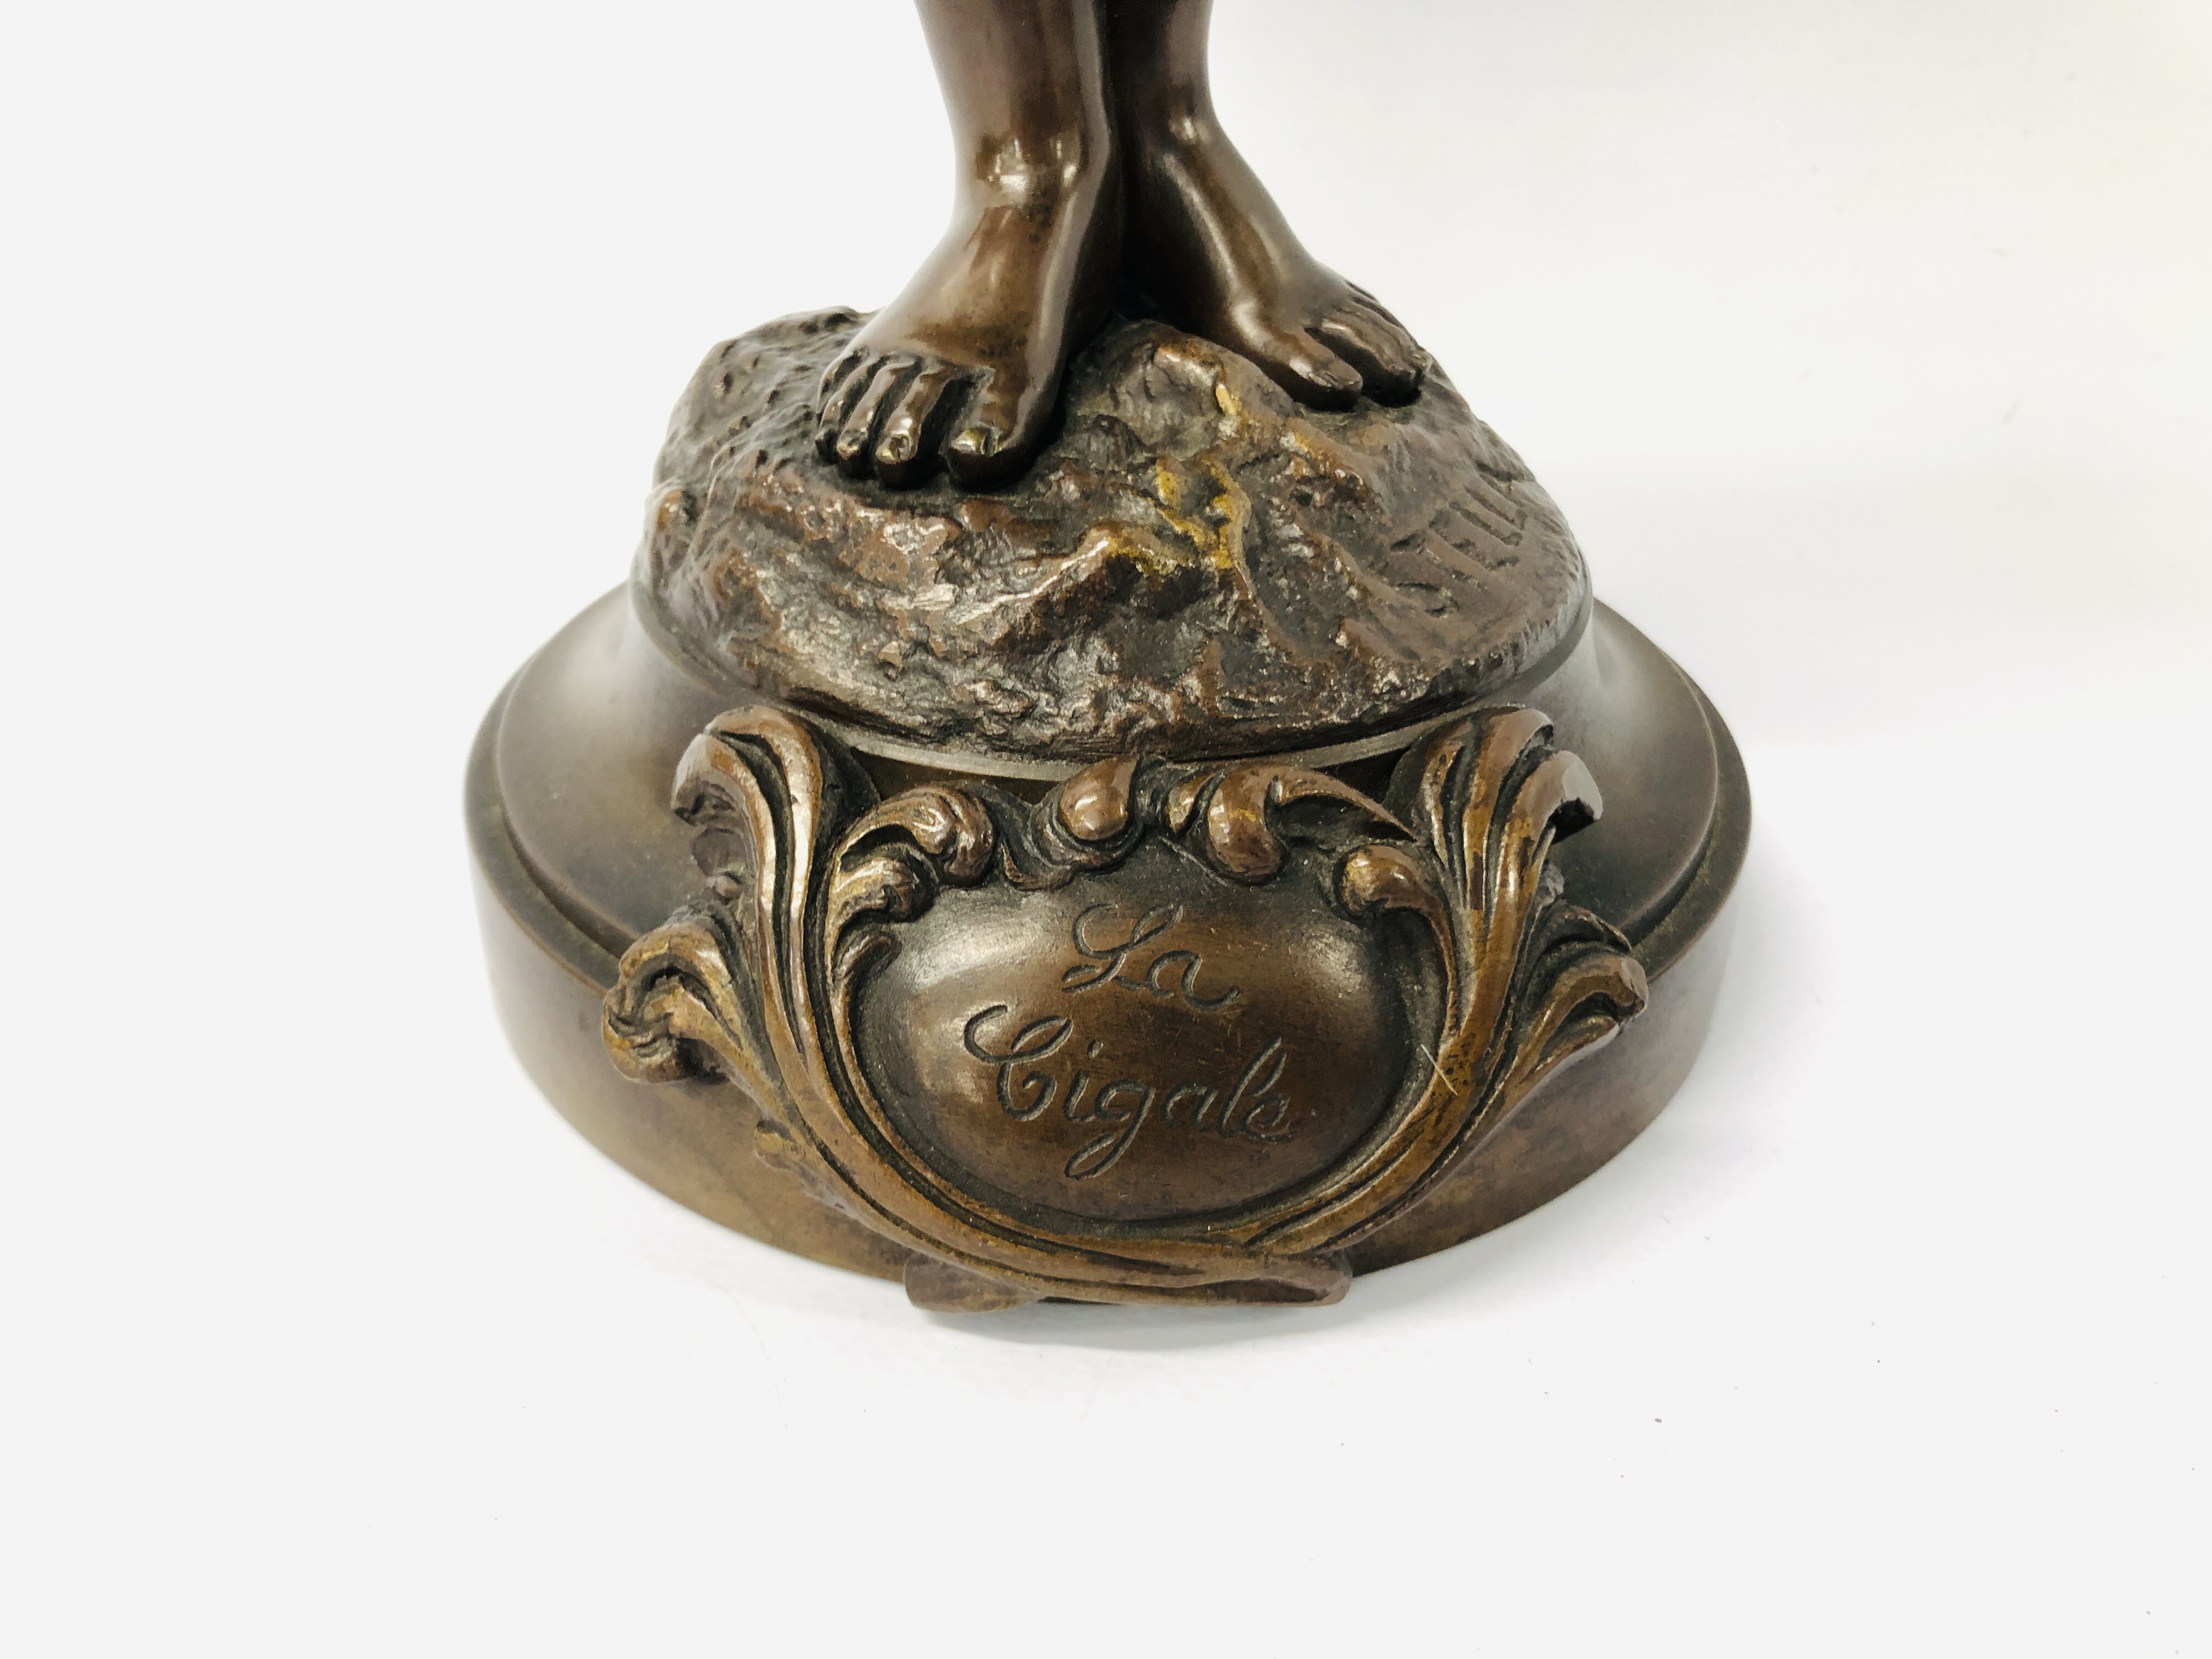 A FRENCH BRONZE OF A FEMALE LUTE PLAYER, THE BASE INSCRIBED "STELLA", - Image 2 of 10